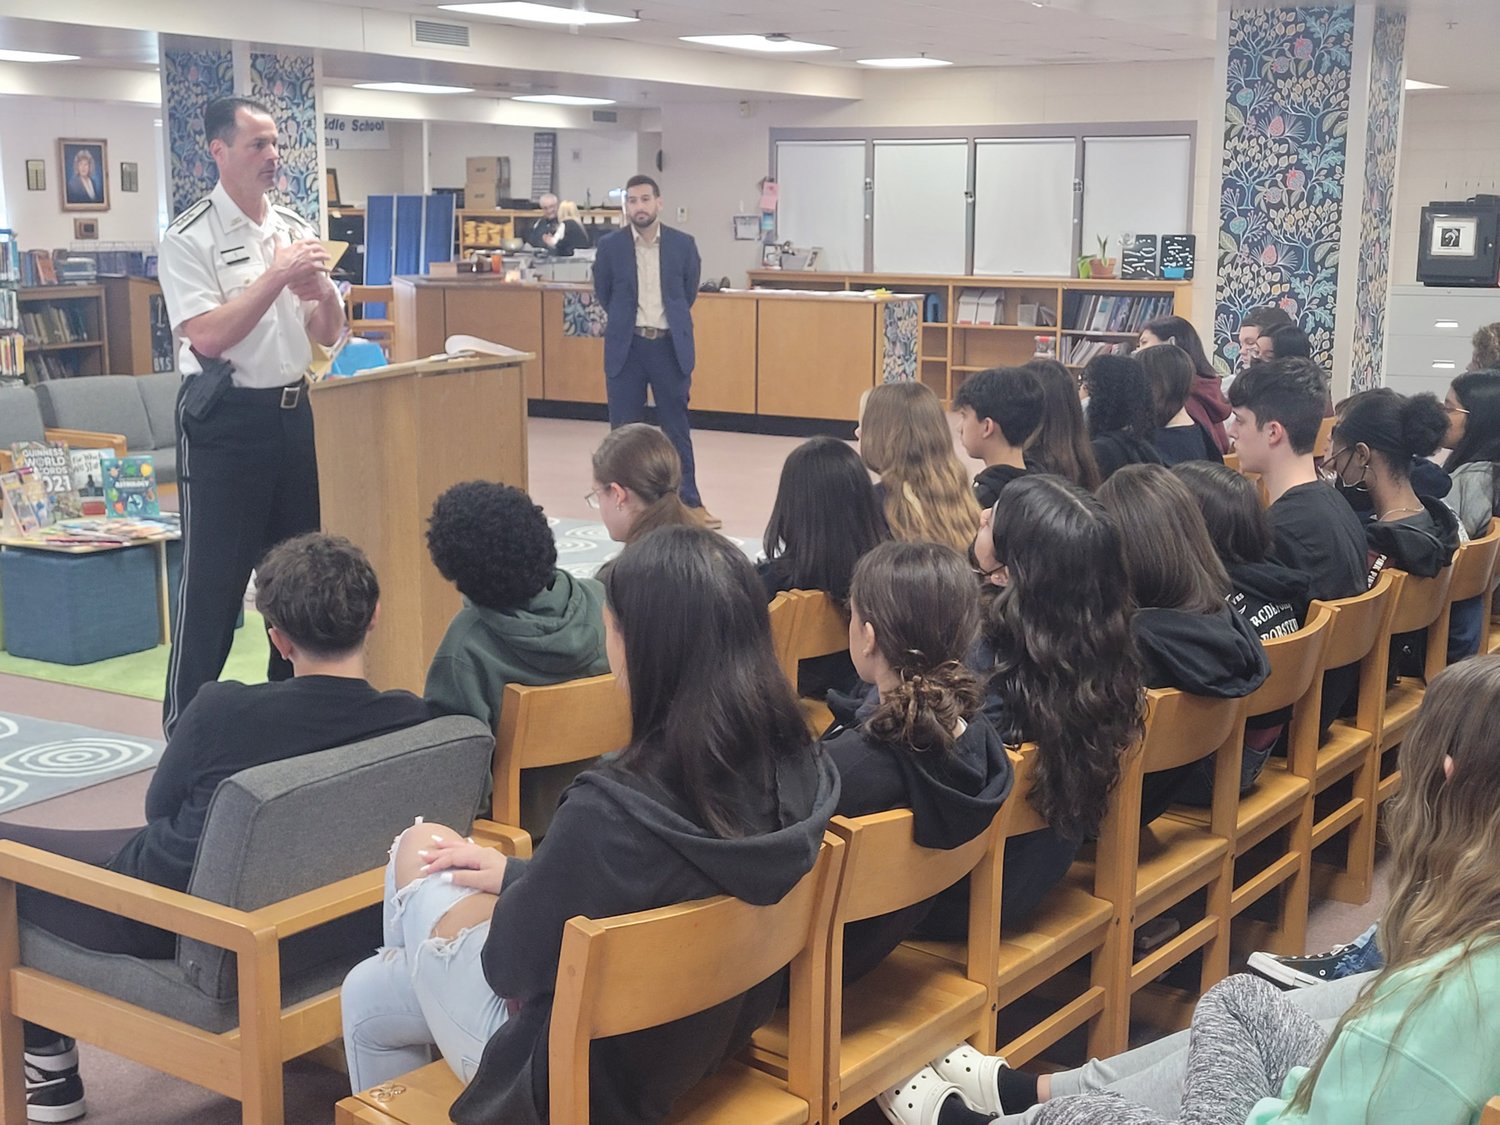 TOUGH QUESTIONS: Johnston Police Chief Joseph P. Razza fielded tough questions from Ferri Middle School civics students during Law Day in 2021.